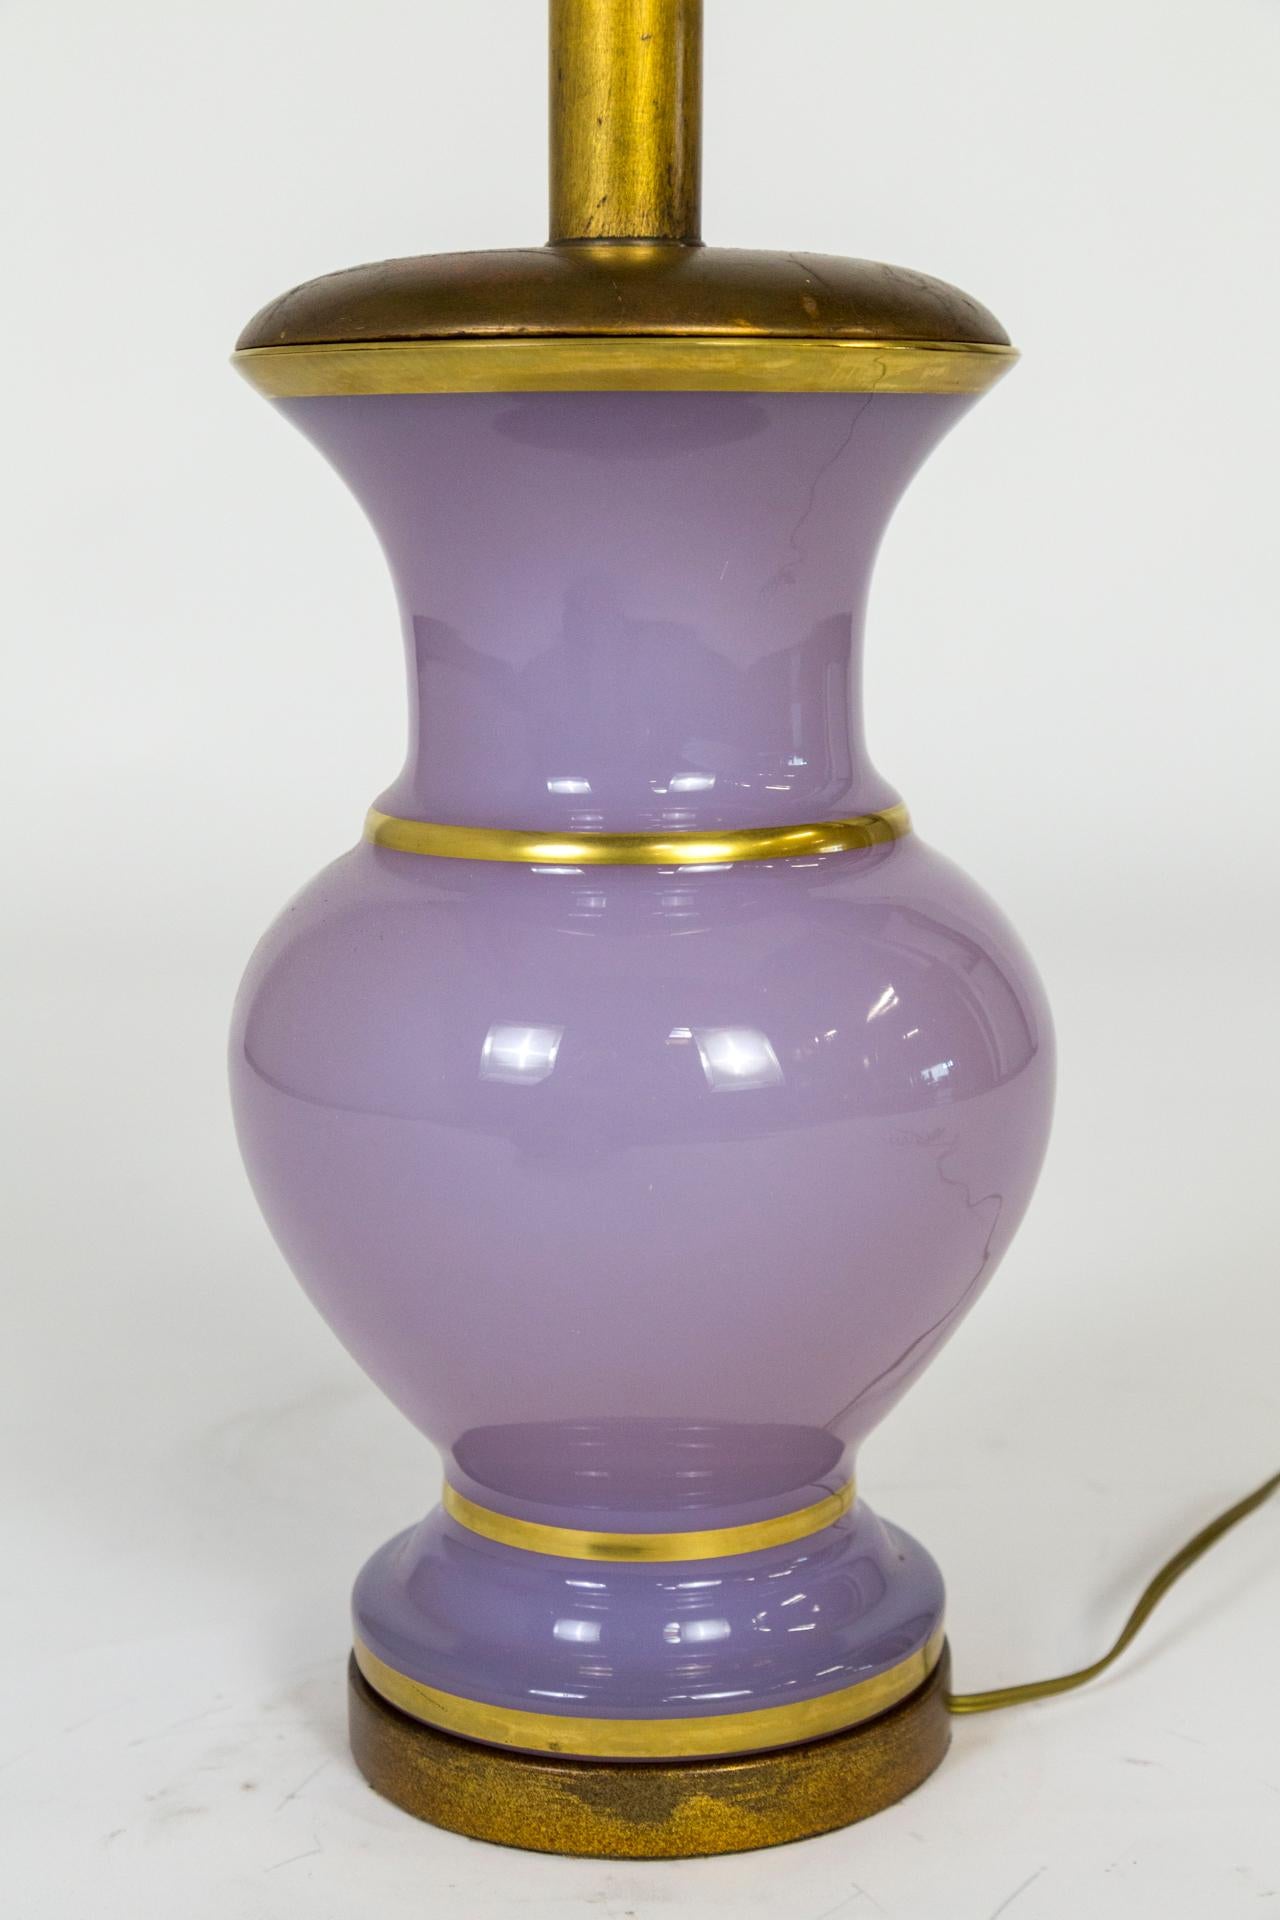 An elegant lamp of Alexandrite, also known as Neodymium, glass  in a complex color that is normally lilac-mauve (in natural and incandescent light), but turns to a pale smokey blue when under fluorescent light. In an urn shape; with a gold accent